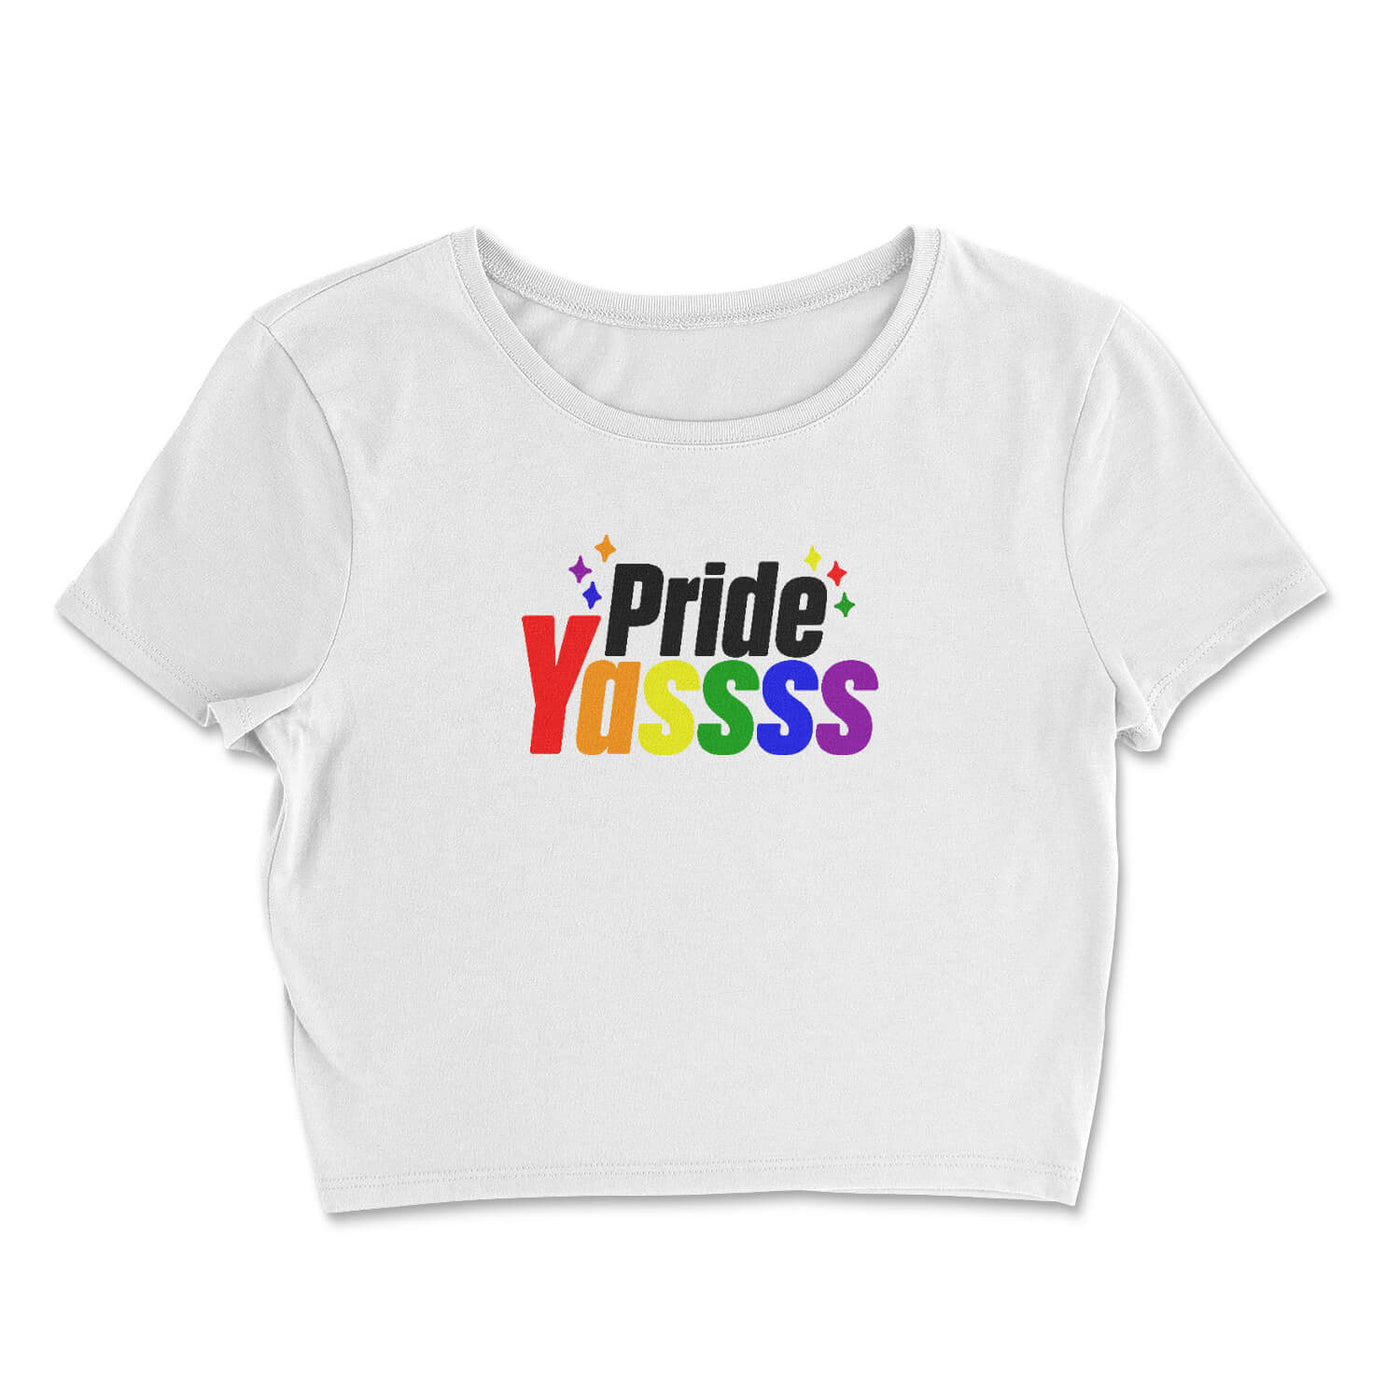 Pride Clothes - Proud, Loud, and Wild Yassss Pride Crop Top - White